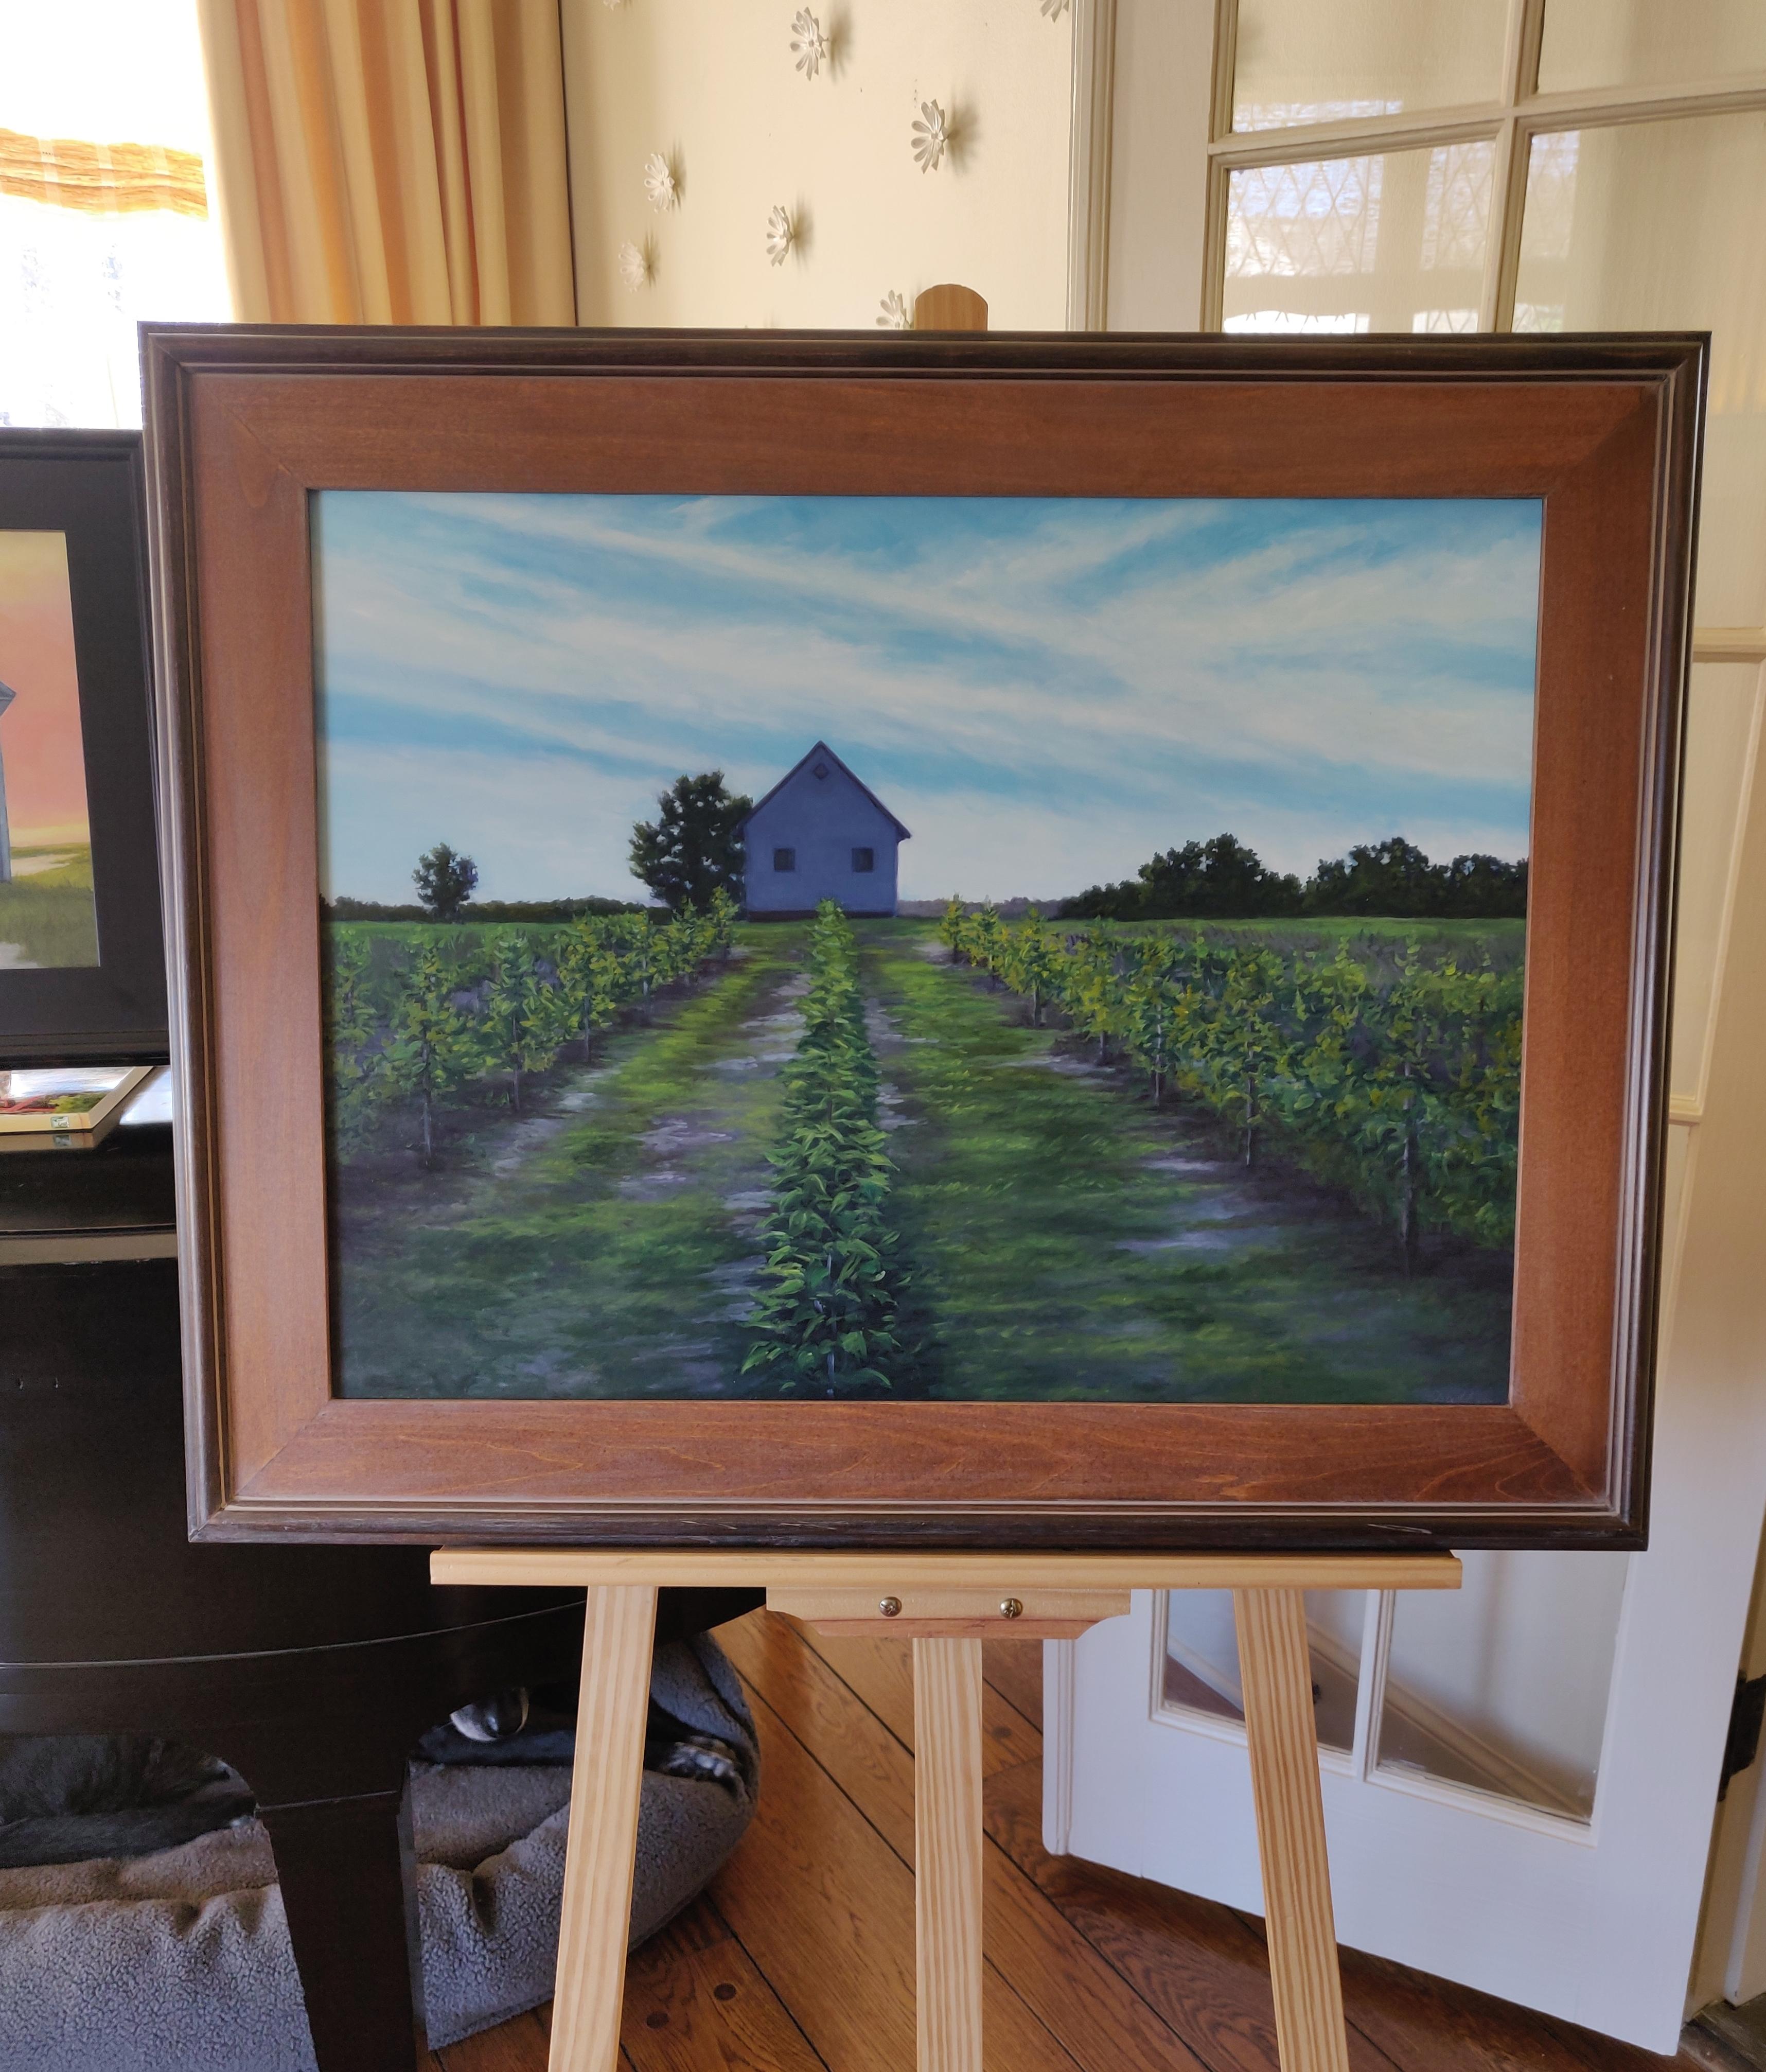 The Vineyard, contemporary landscape, oil painting, field, white house - Painting by Edward Duff